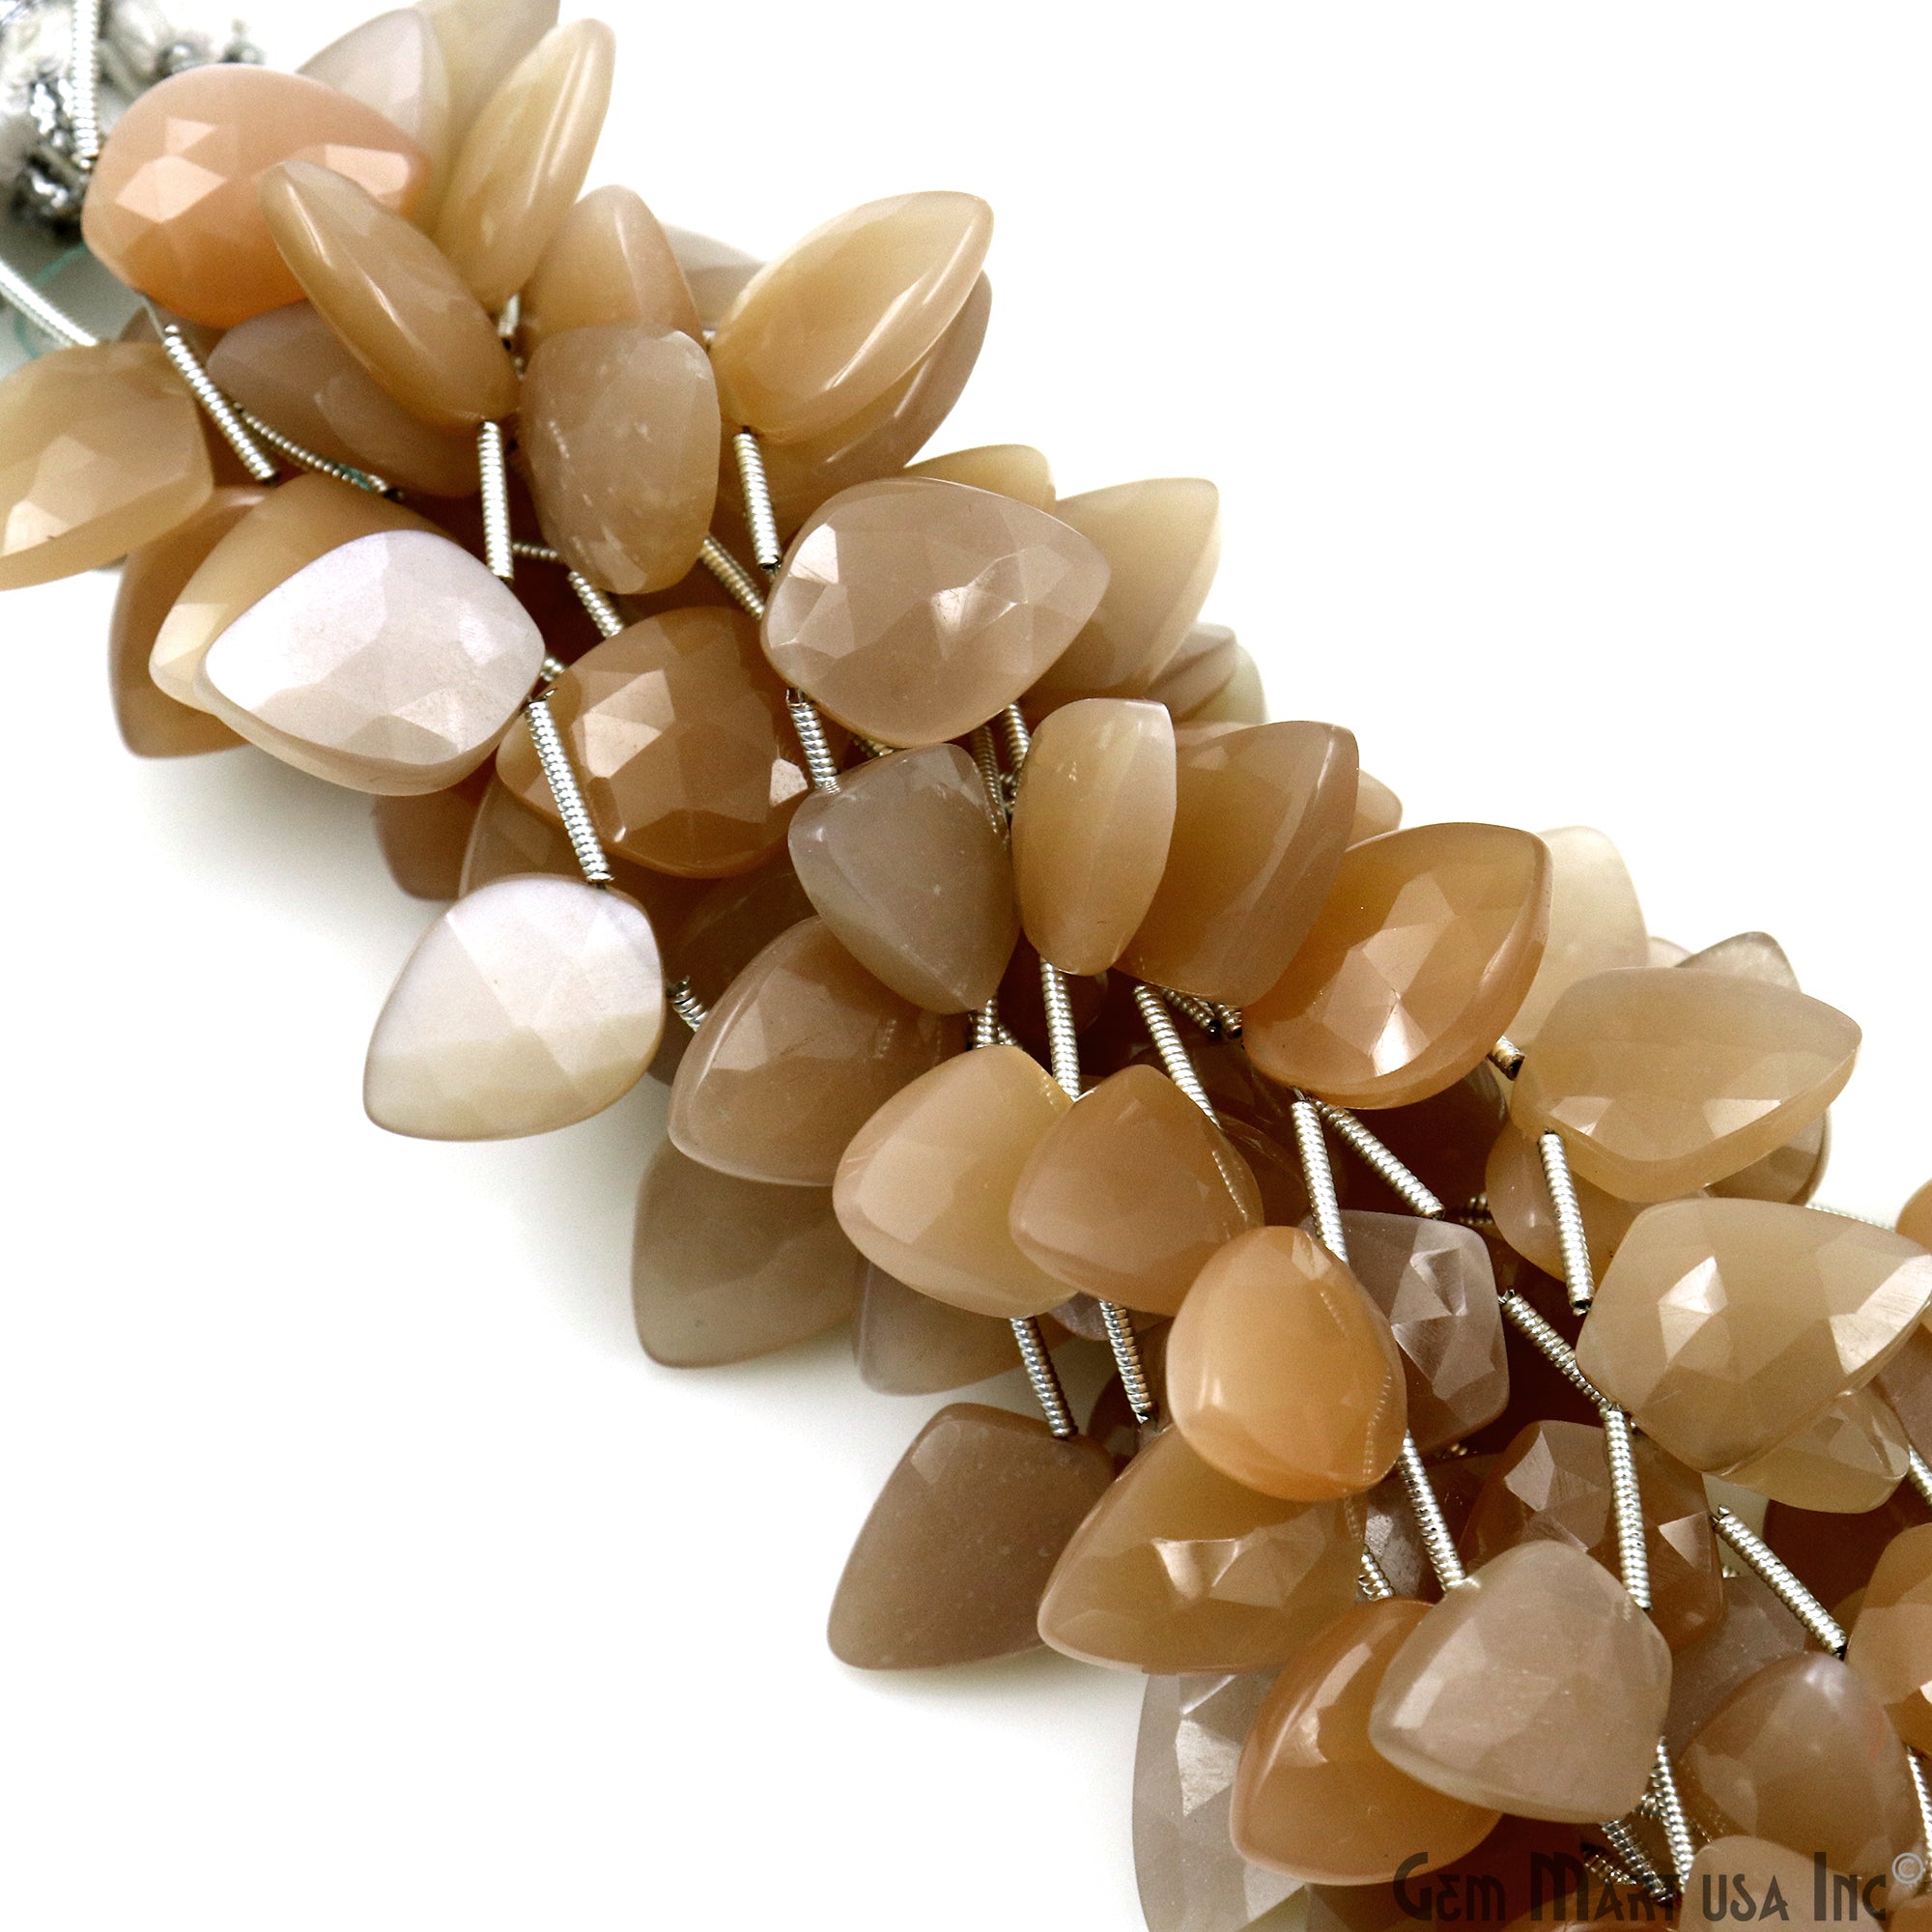 Peach Moonstone Faceted Kite Shape 16x12mm Gemstone 6 Inch Strands Briolette Drops